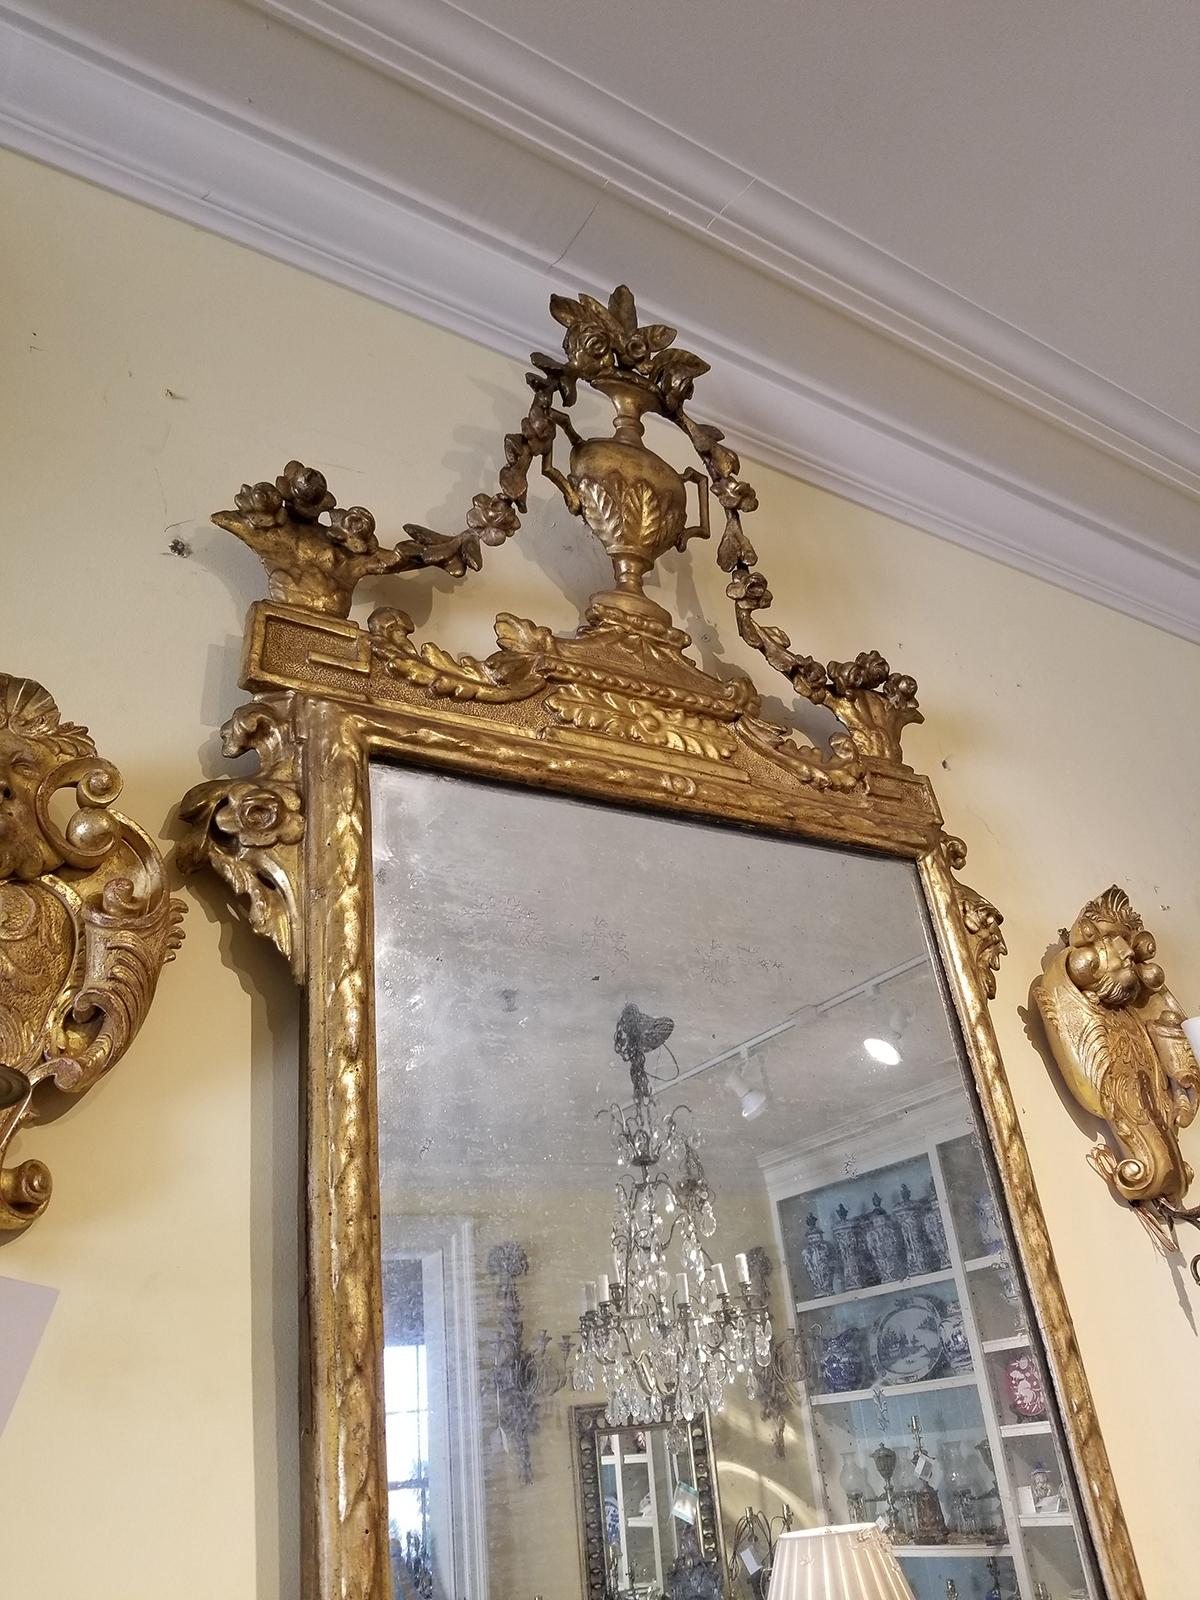 19th century Italian giltwood mirror, incredible carved urn with floral detail.
Beautiful